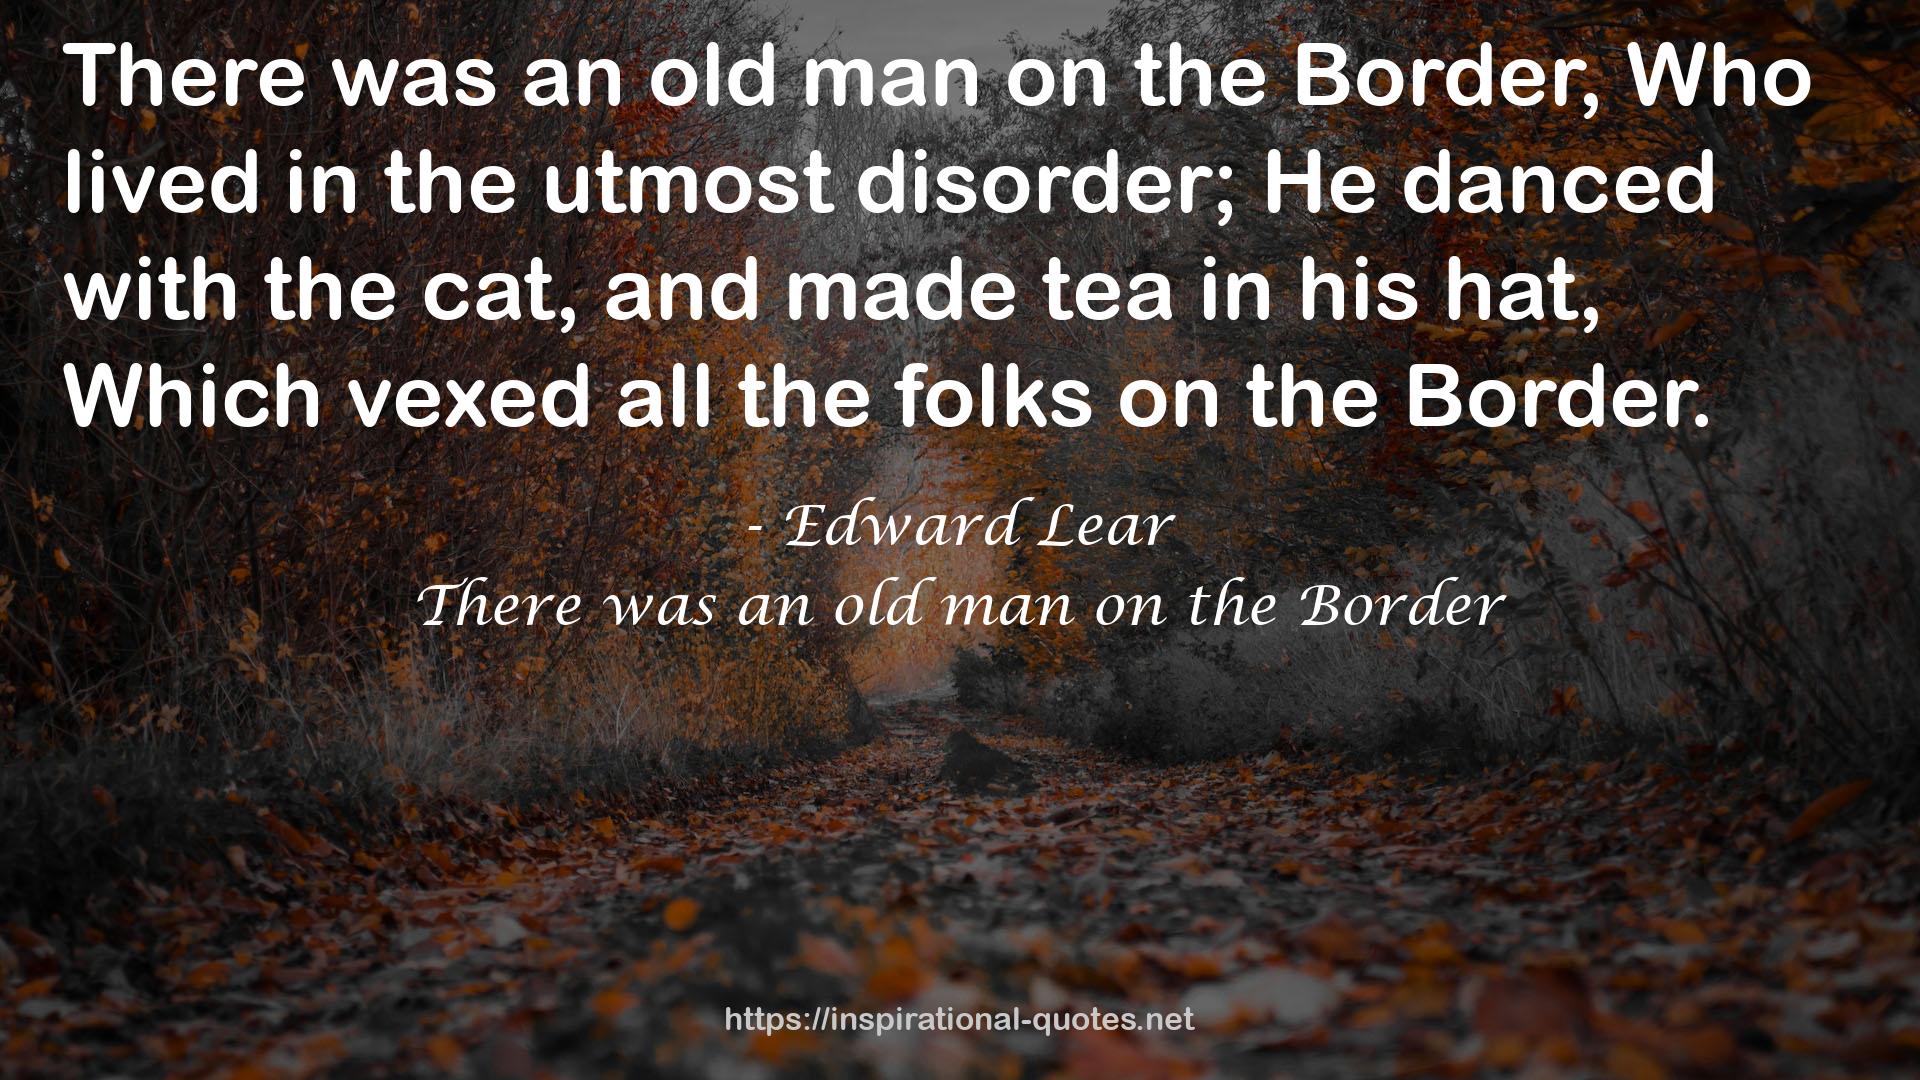 There was an old man on the Border QUOTES